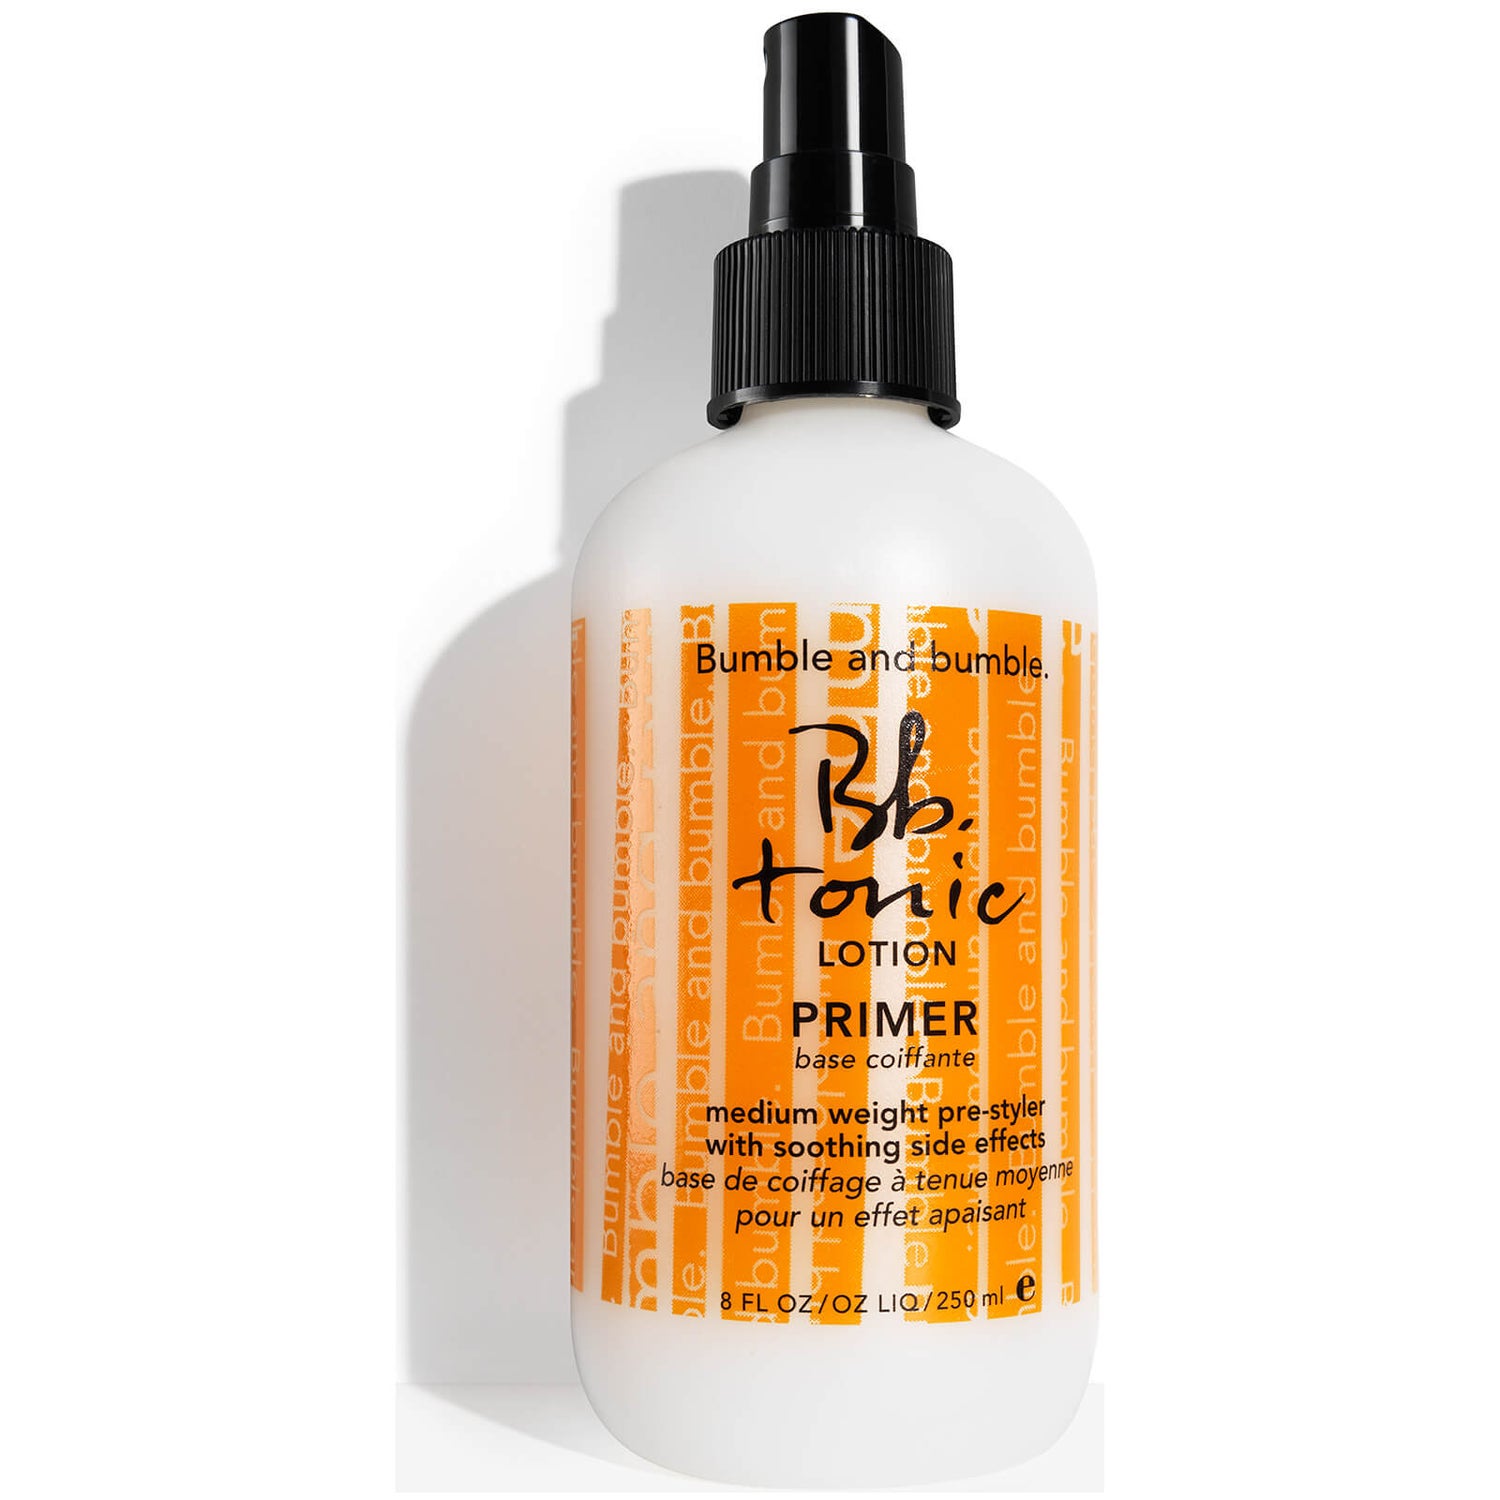 Bumble and bumble Tonic Lotion (250ml)